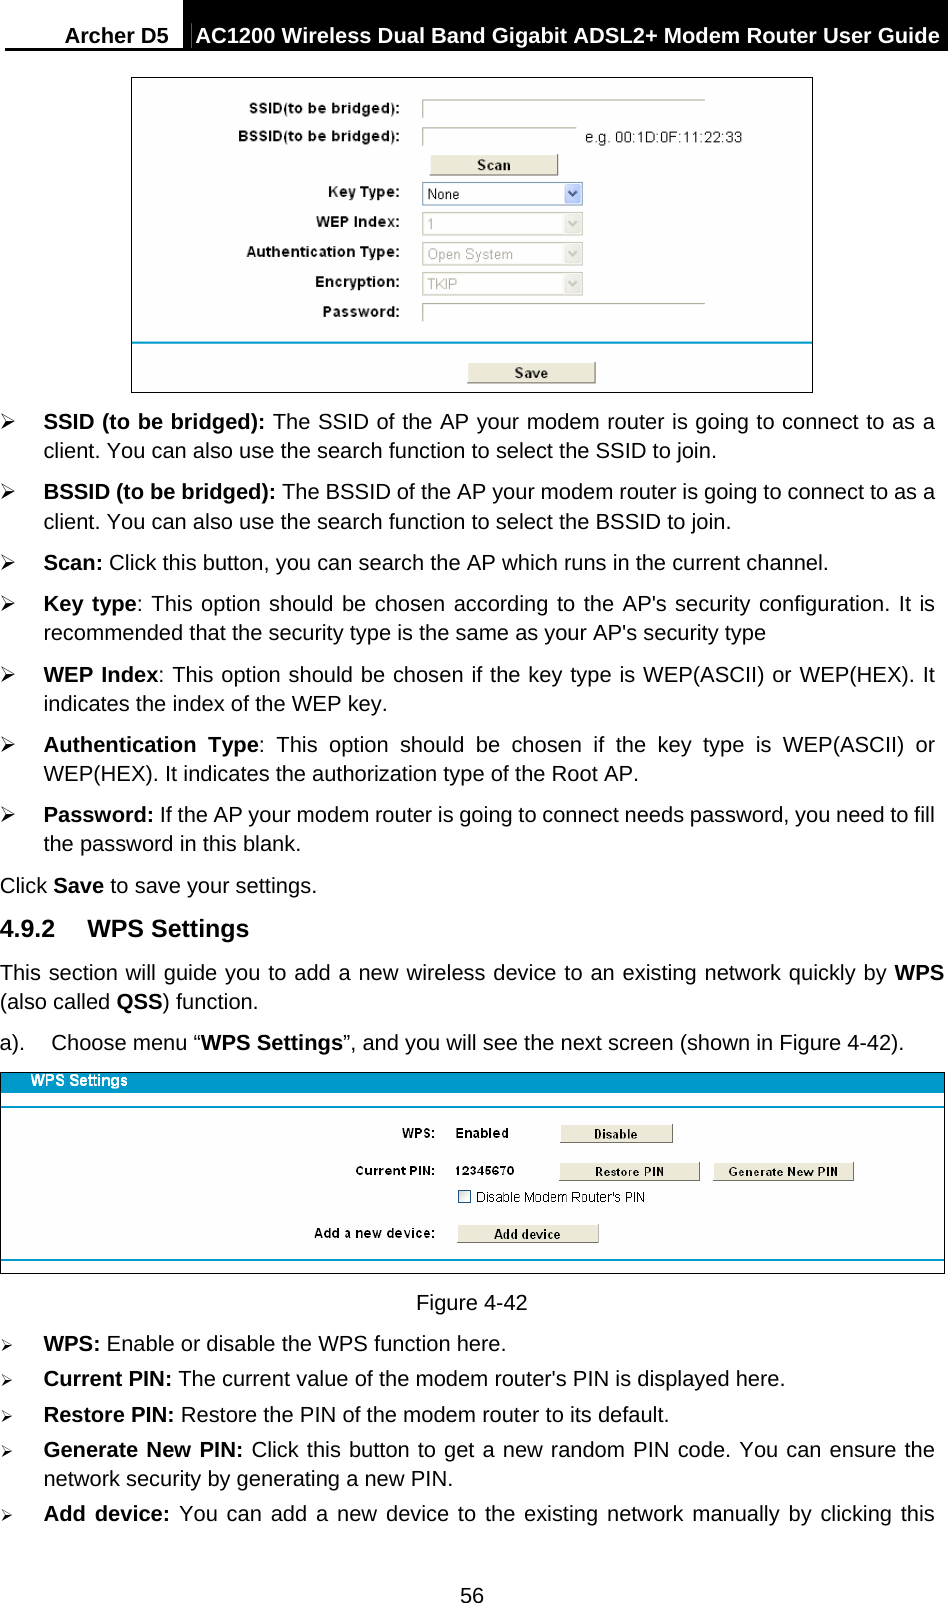 Archer D5  AC1200 Wireless Dual Band Gigabit ADSL2+ Modem Router User Guide 56   SSID (to be bridged): The SSID of the AP your modem router is going to connect to as a client. You can also use the search function to select the SSID to join.  BSSID (to be bridged): The BSSID of the AP your modem router is going to connect to as a client. You can also use the search function to select the BSSID to join.  Scan: Click this button, you can search the AP which runs in the current channel.  Key type: This option should be chosen according to the AP&apos;s security configuration. It is recommended that the security type is the same as your AP&apos;s security type  WEP Index: This option should be chosen if the key type is WEP(ASCII) or WEP(HEX). It indicates the index of the WEP key.  Authentication Type: This option should be chosen if the key type is WEP(ASCII) or WEP(HEX). It indicates the authorization type of the Root AP.  Password: If the AP your modem router is going to connect needs password, you need to fill the password in this blank. Click Save to save your settings. 4.9.2  WPS Settings This section will guide you to add a new wireless device to an existing network quickly by WPS (also called QSS) function. a).  Choose menu “WPS Settings”, and you will see the next screen (shown in Figure 4-42).   Figure 4-42  WPS: Enable or disable the WPS function here.    Current PIN: The current value of the modem router&apos;s PIN is displayed here.    Restore PIN: Restore the PIN of the modem router to its default.    Generate New PIN: Click this button to get a new random PIN code. You can ensure the network security by generating a new PIN.  Add device: You can add a new device to the existing network manually by clicking this 